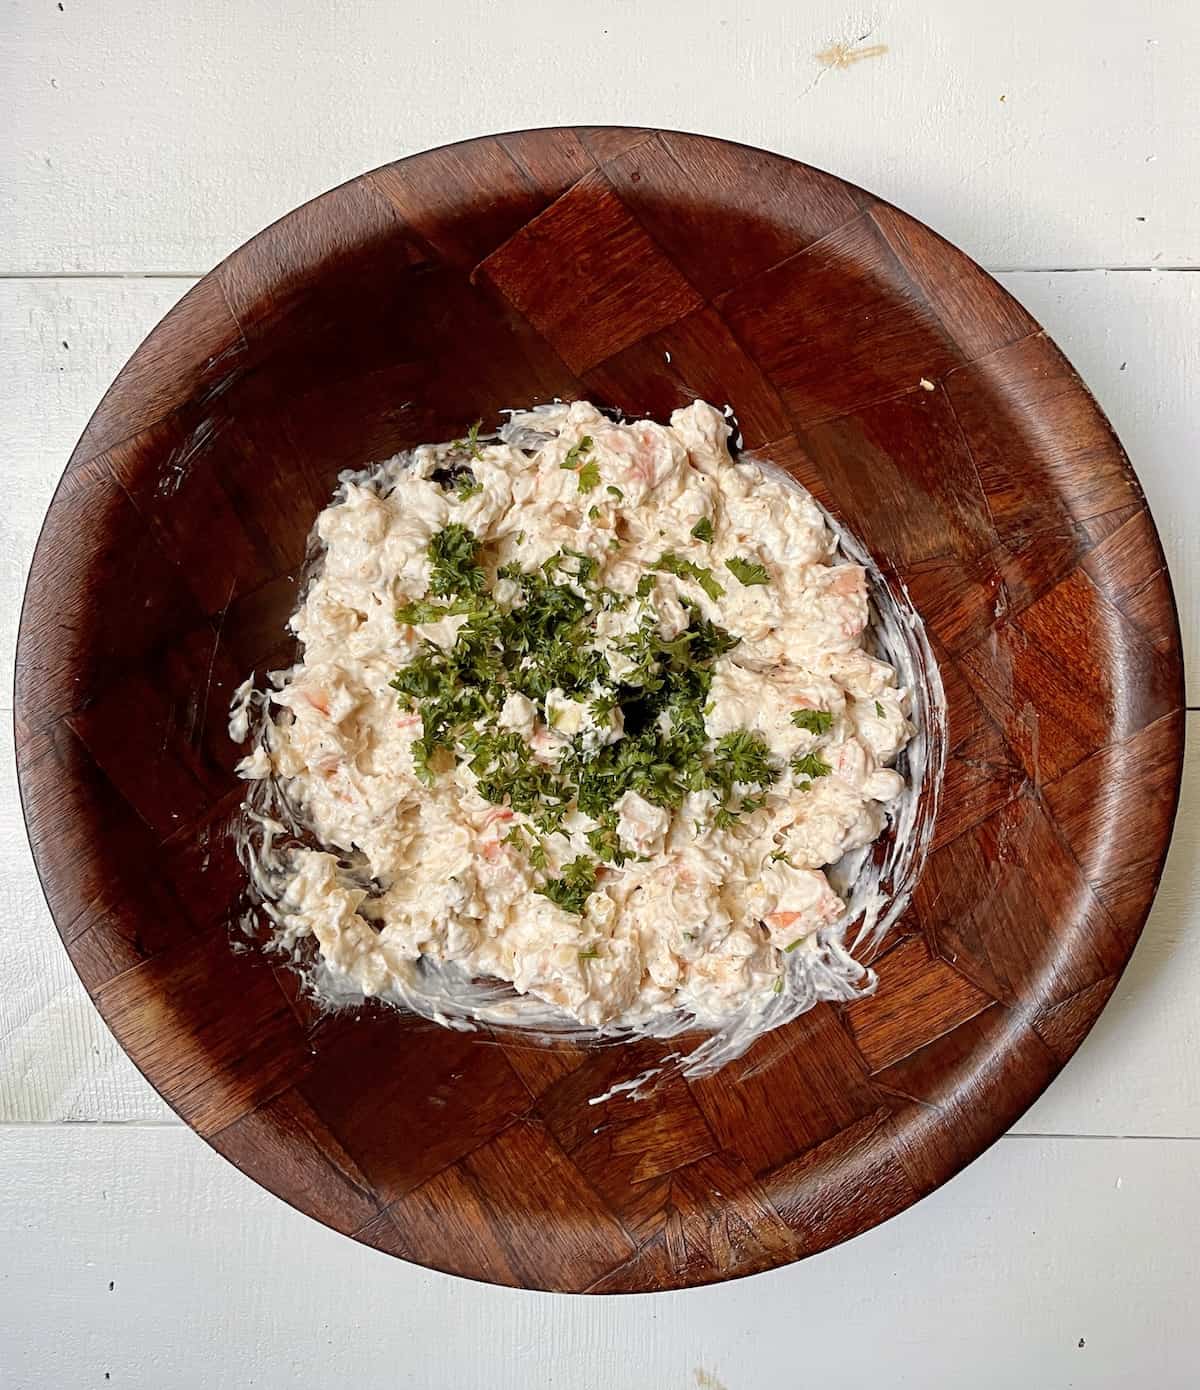 Shrimp dip mixture with parsley in wood bowl on white table.